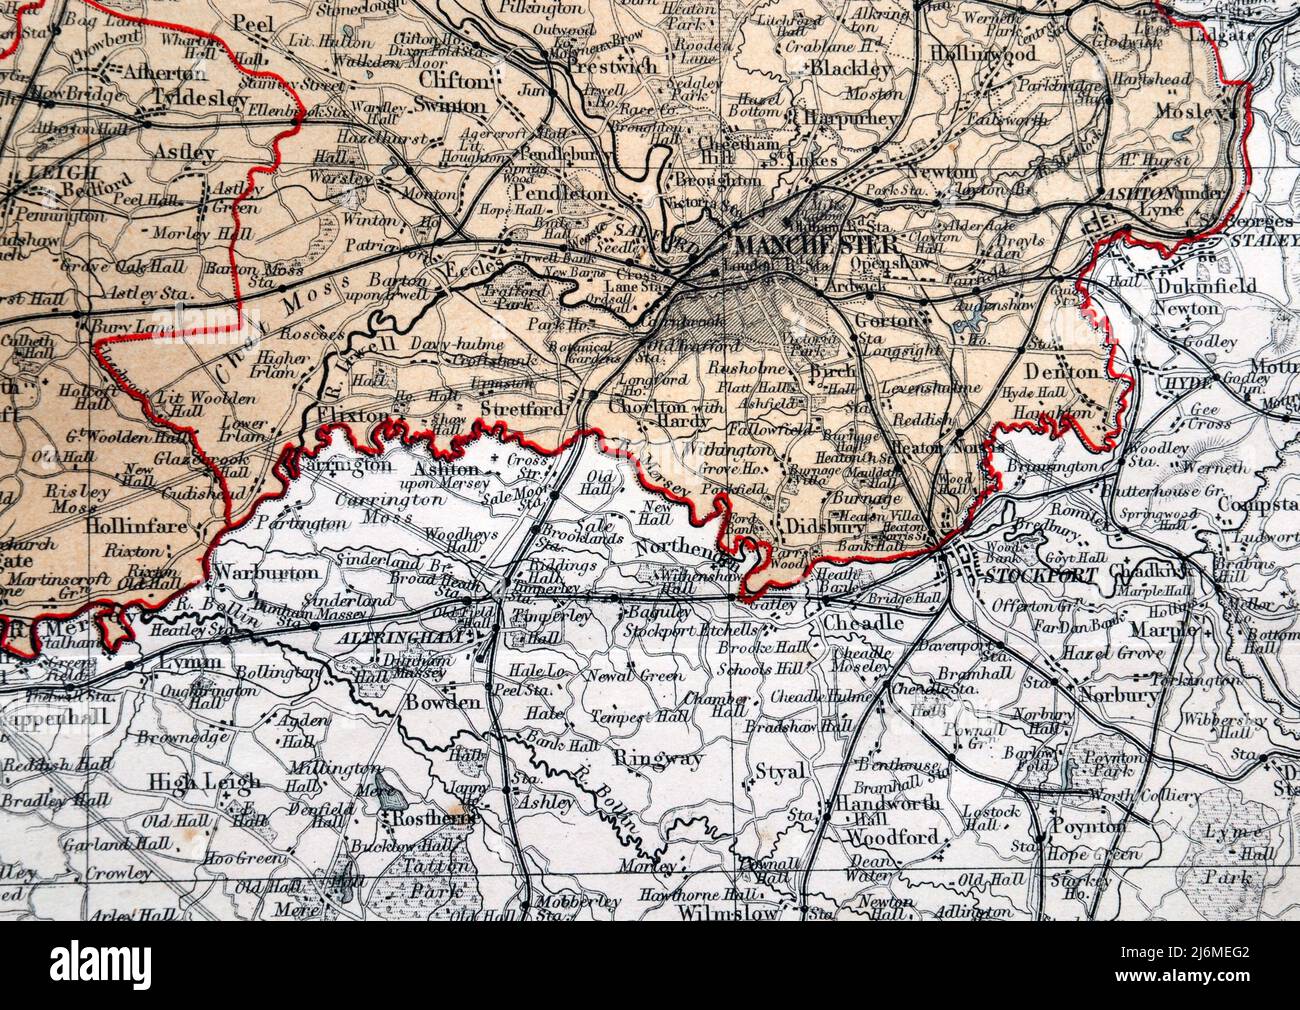 Detail from an 1868 Map of the County Palatine of Lancaster, so Lancashire as it was then, From the Ordnance Survey by J. Bartholomew F.R.G.S.; this section showing Manchester to the North, including Blackley, Didsbury, Gorton, Leigh, Clifton, Denton, Ashton under Lyne (all then in Lancashire), with Cheshire to the South, including  Altrincham, Stockport, Lymm, Cheadle, Stock Photo